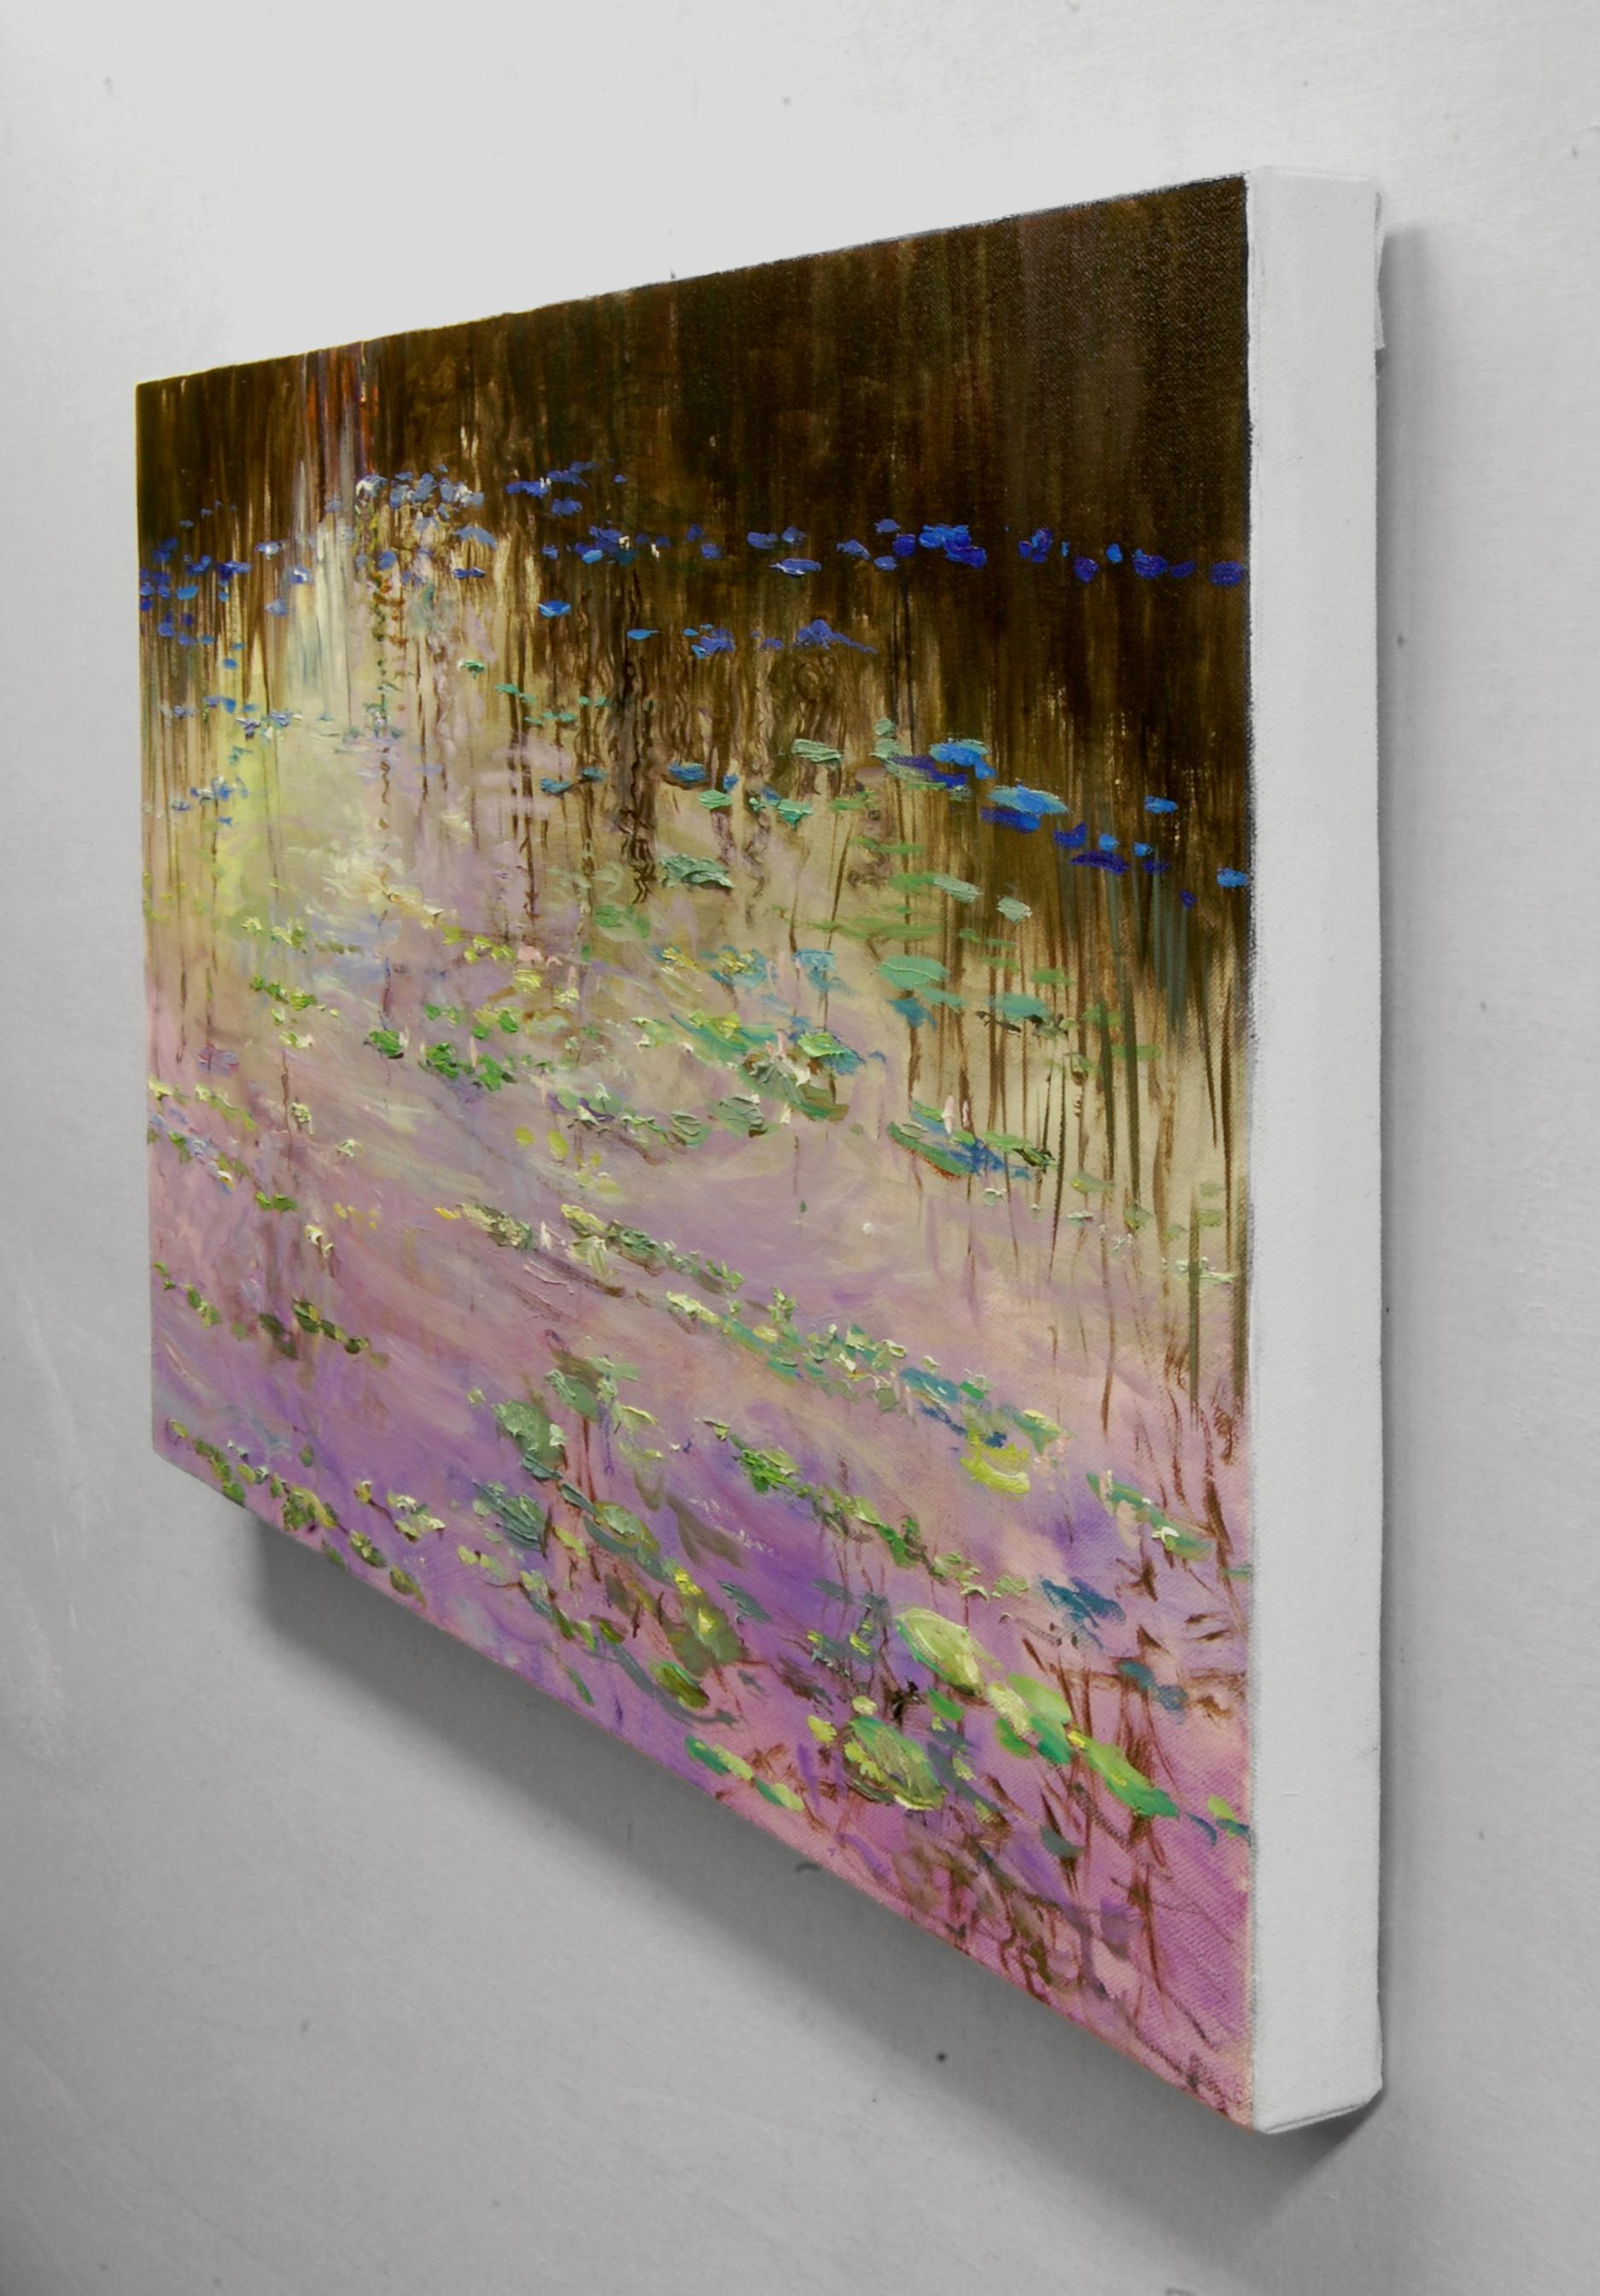 <p>Artist Comments<br>Early evening colors reflect on a peaceful lake, painting its surface with soft purple hues. Aquatic plants pick up different tones as they recede into the shadier reaches near the reeds. This artwork is part of Onelio